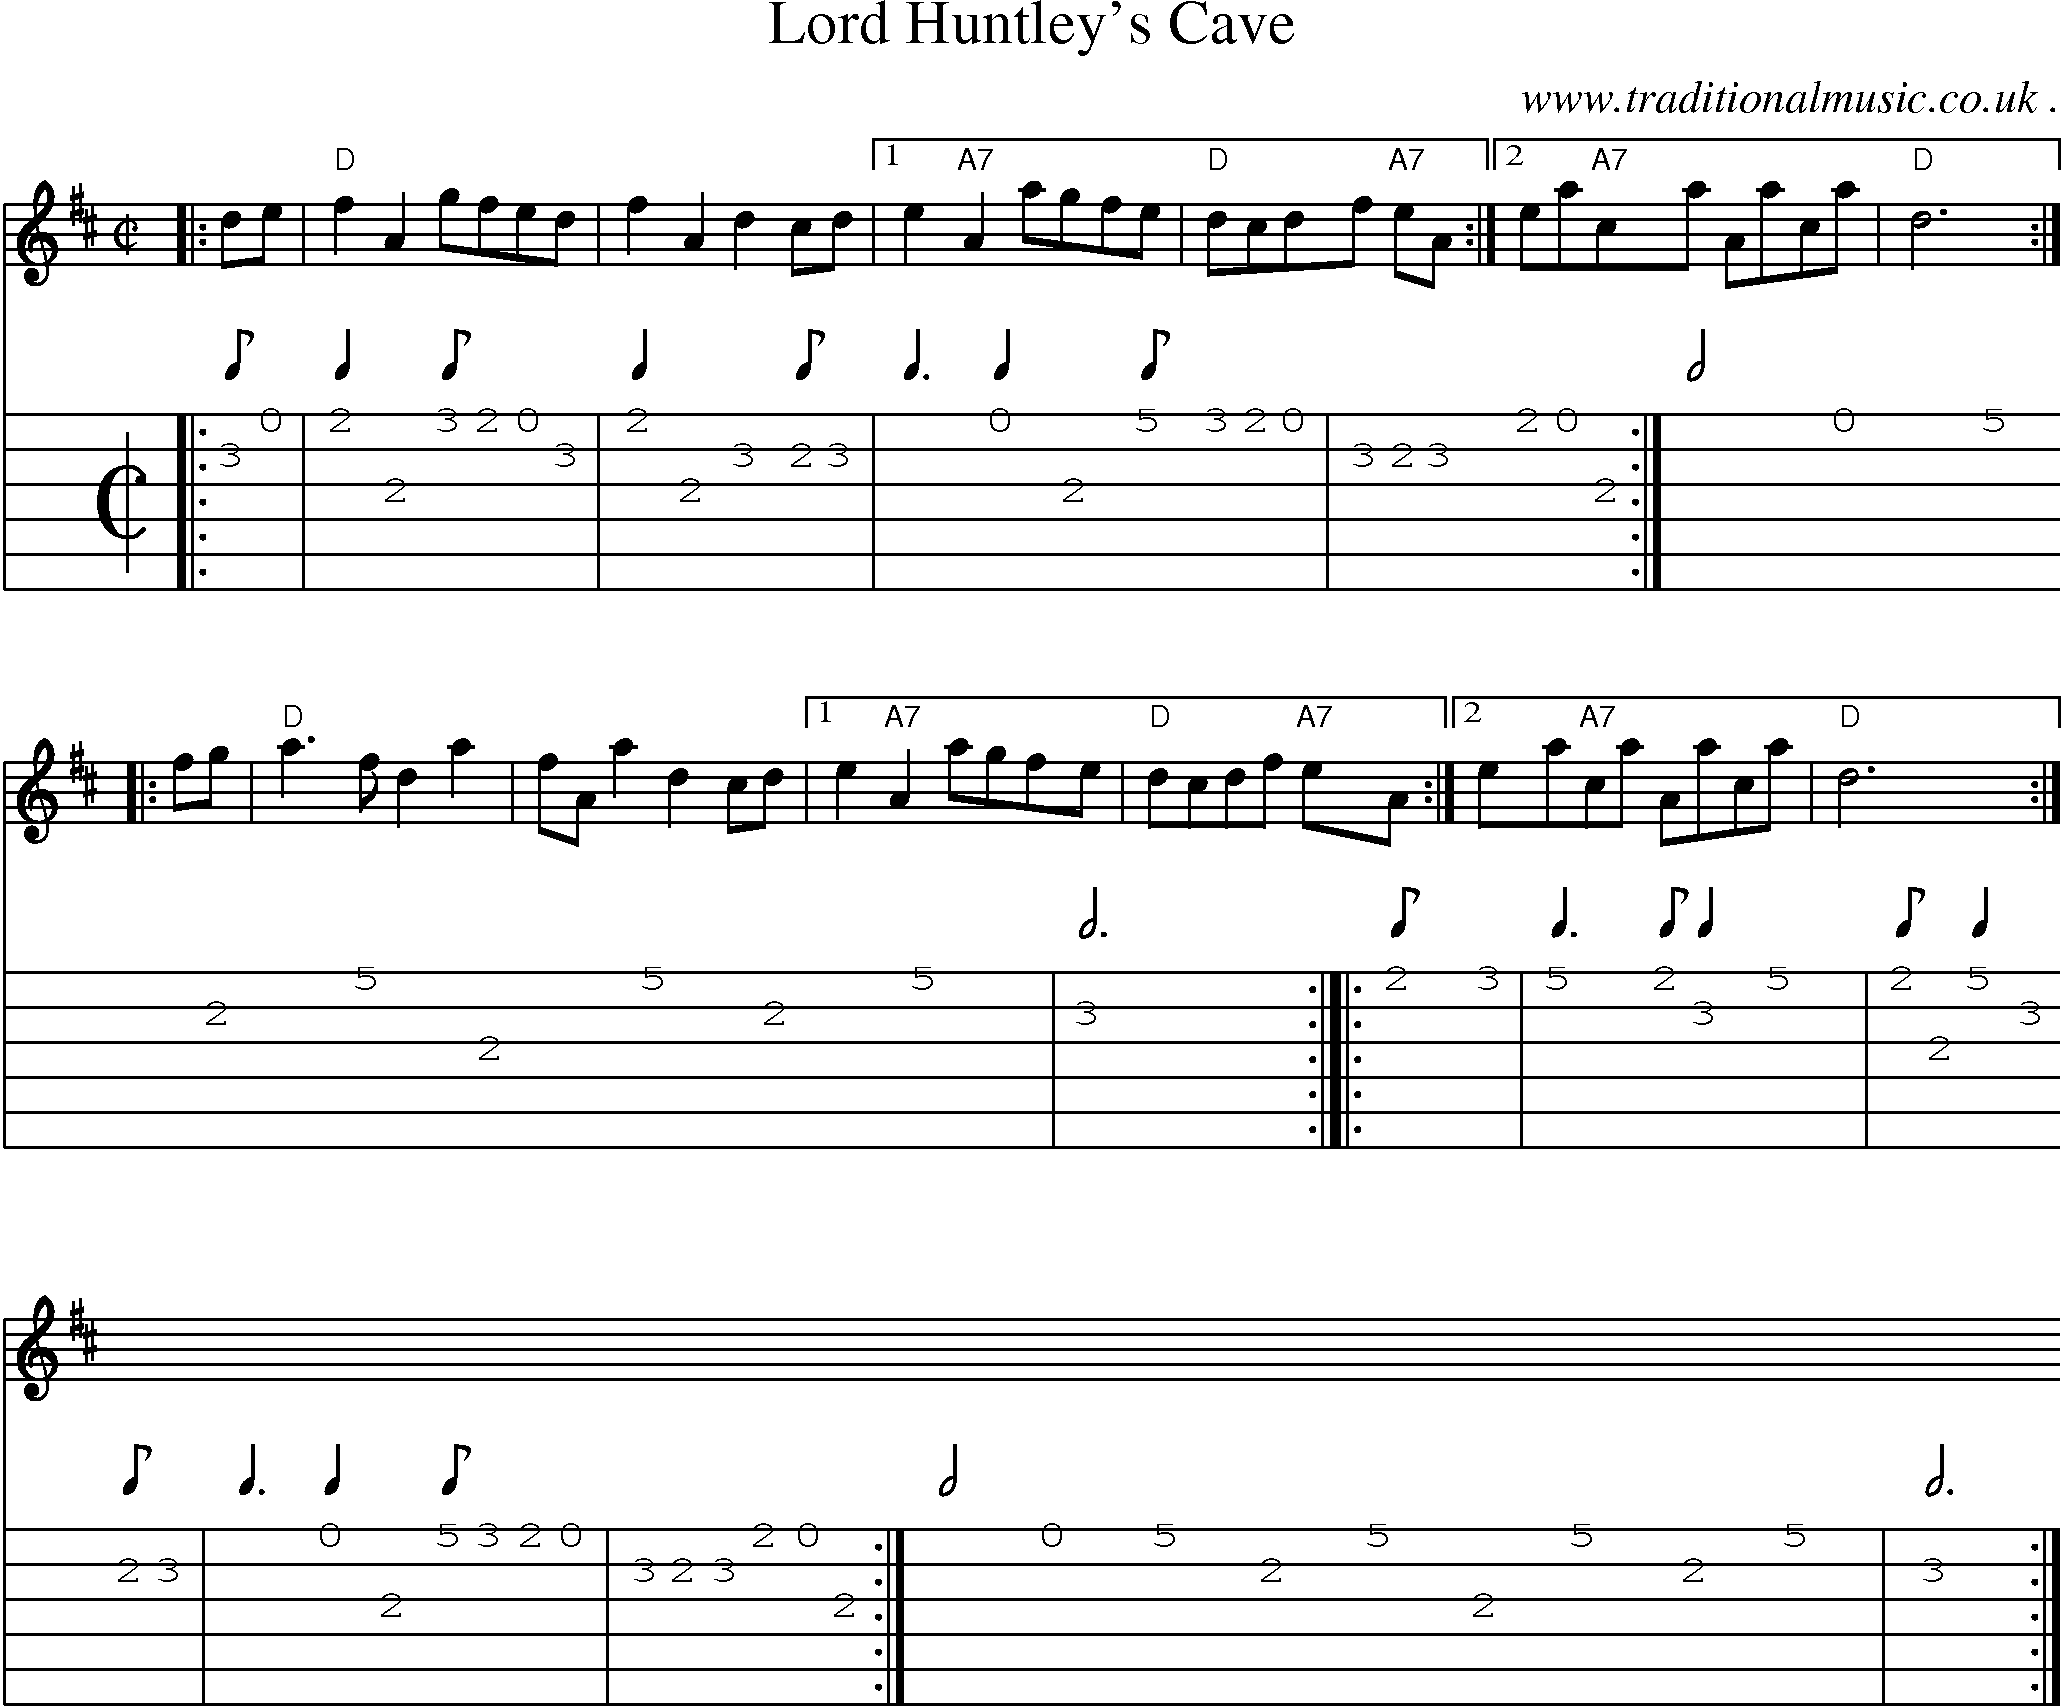 Sheet-music  score, Chords and Guitar Tabs for Lord Huntleys Cave